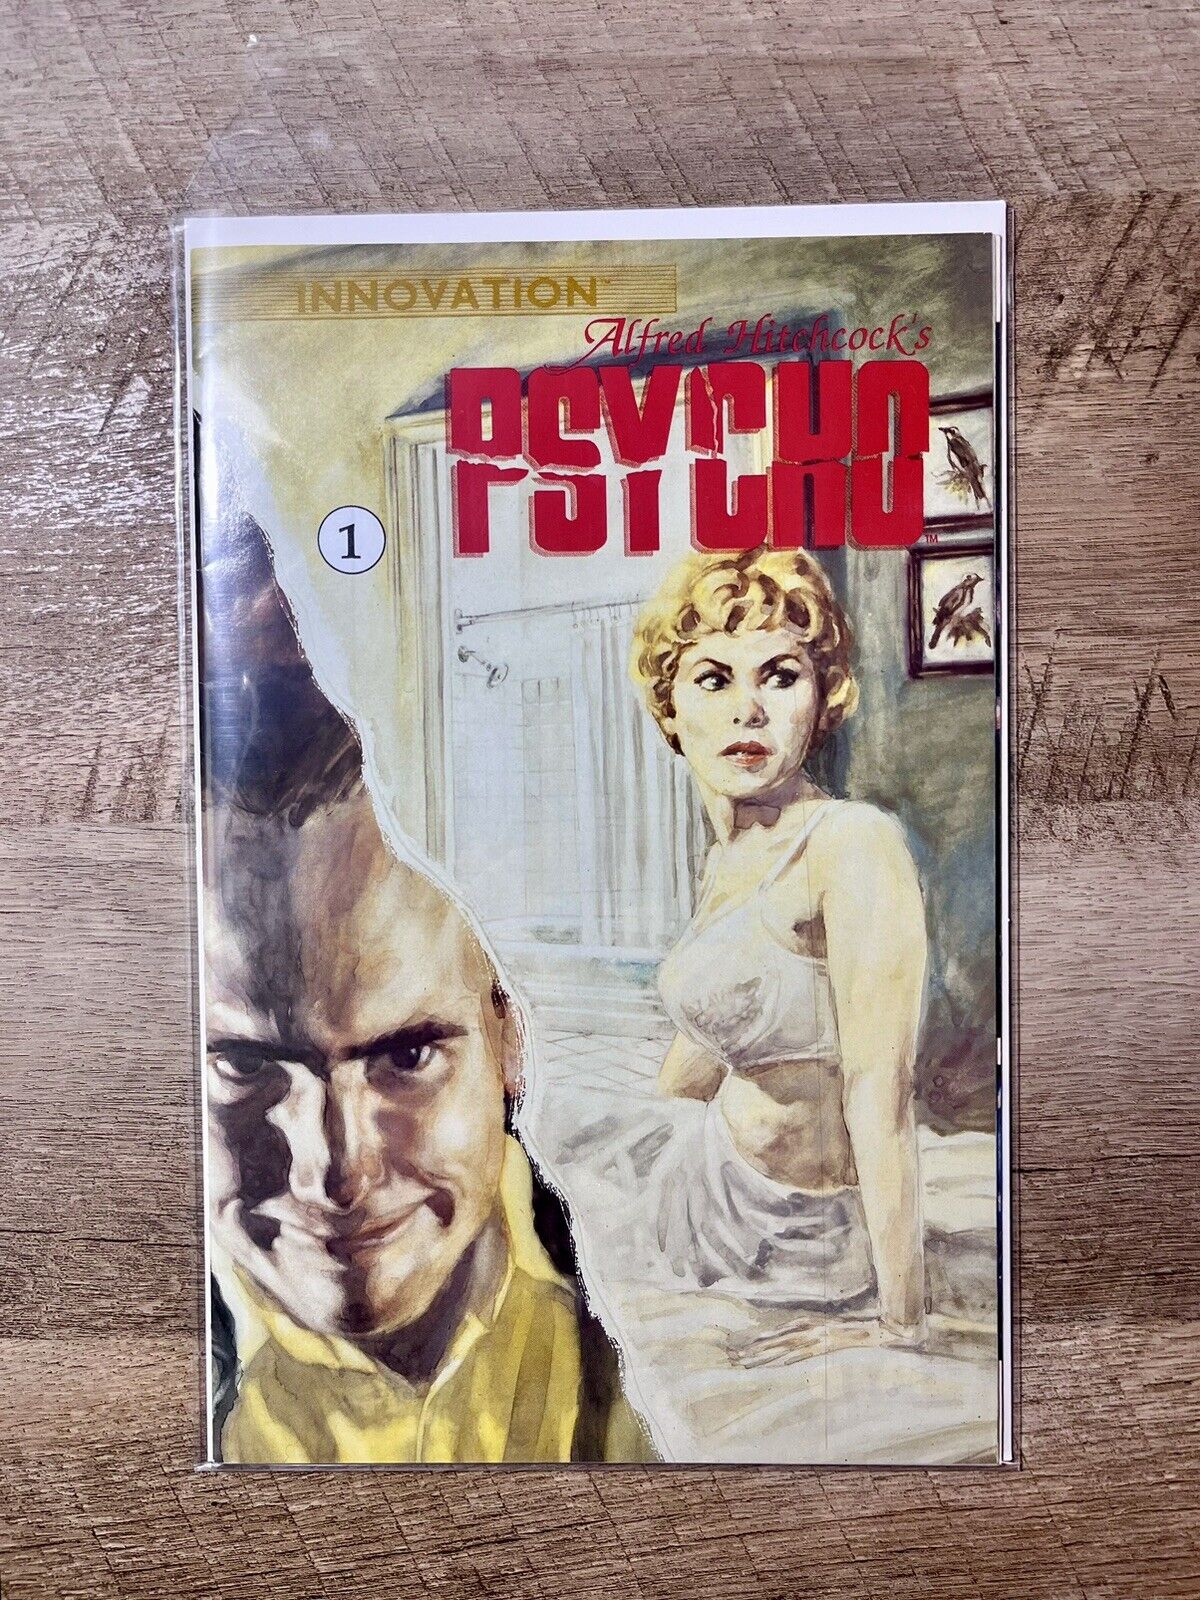 Alfred Hitchcock’s Psycho #1 Comic Book Horror 1992 Innovation Movie Adaptation